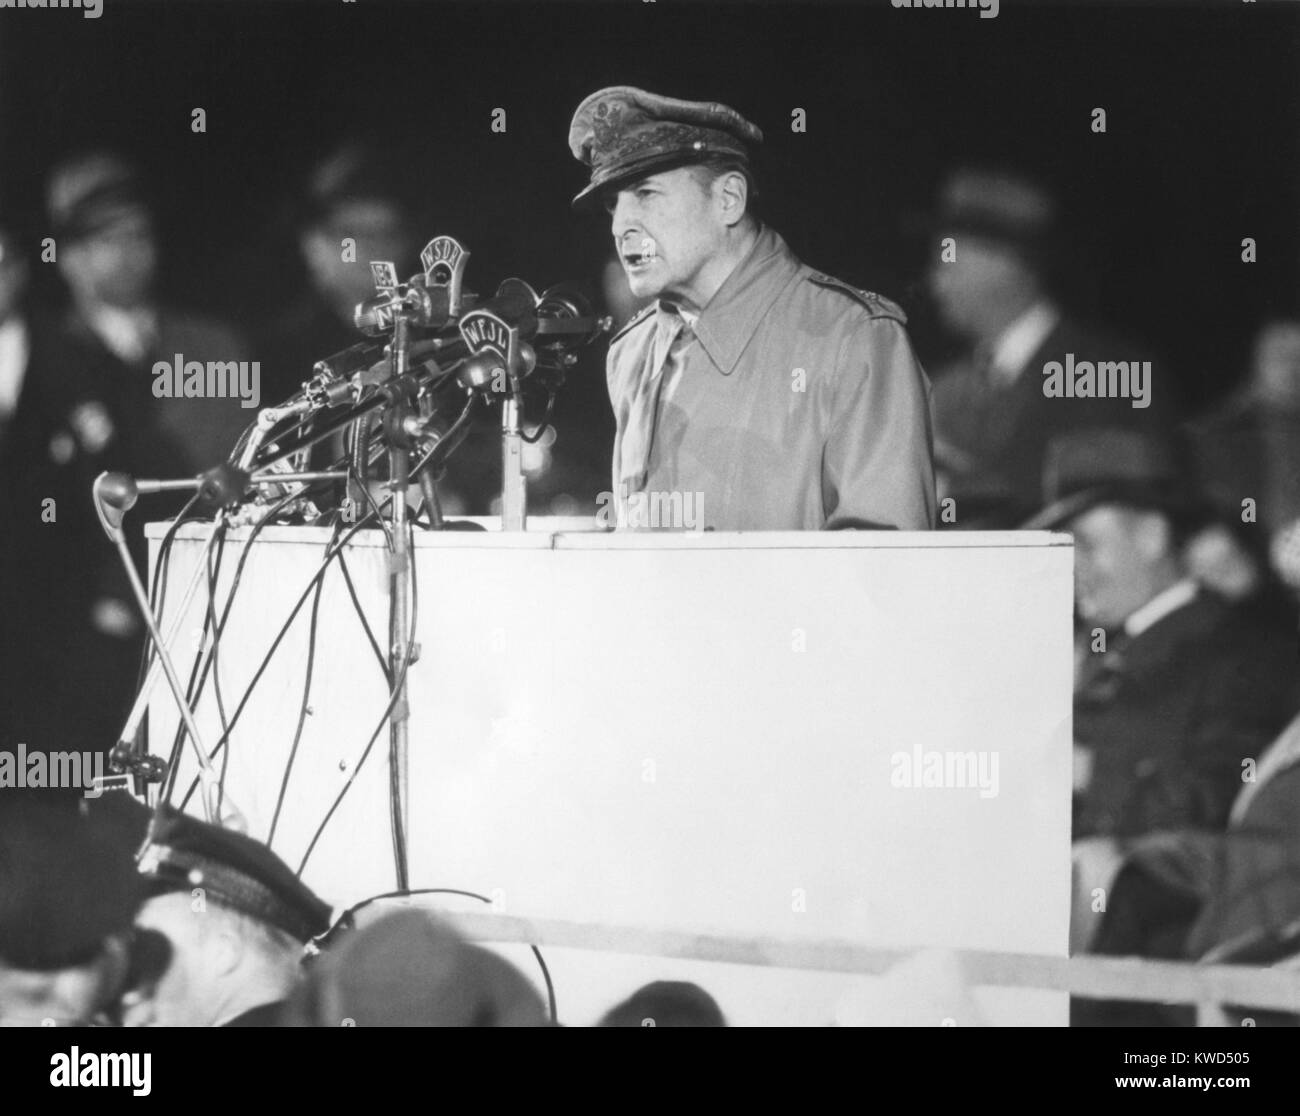 General Douglas MacArthur addressing an audience of 50,000 at Soldier's Field, Chicago on April 26, 1951. Three million people lined his parade route in Chicago. (BSLOC 2014 11 141) Stock Photo